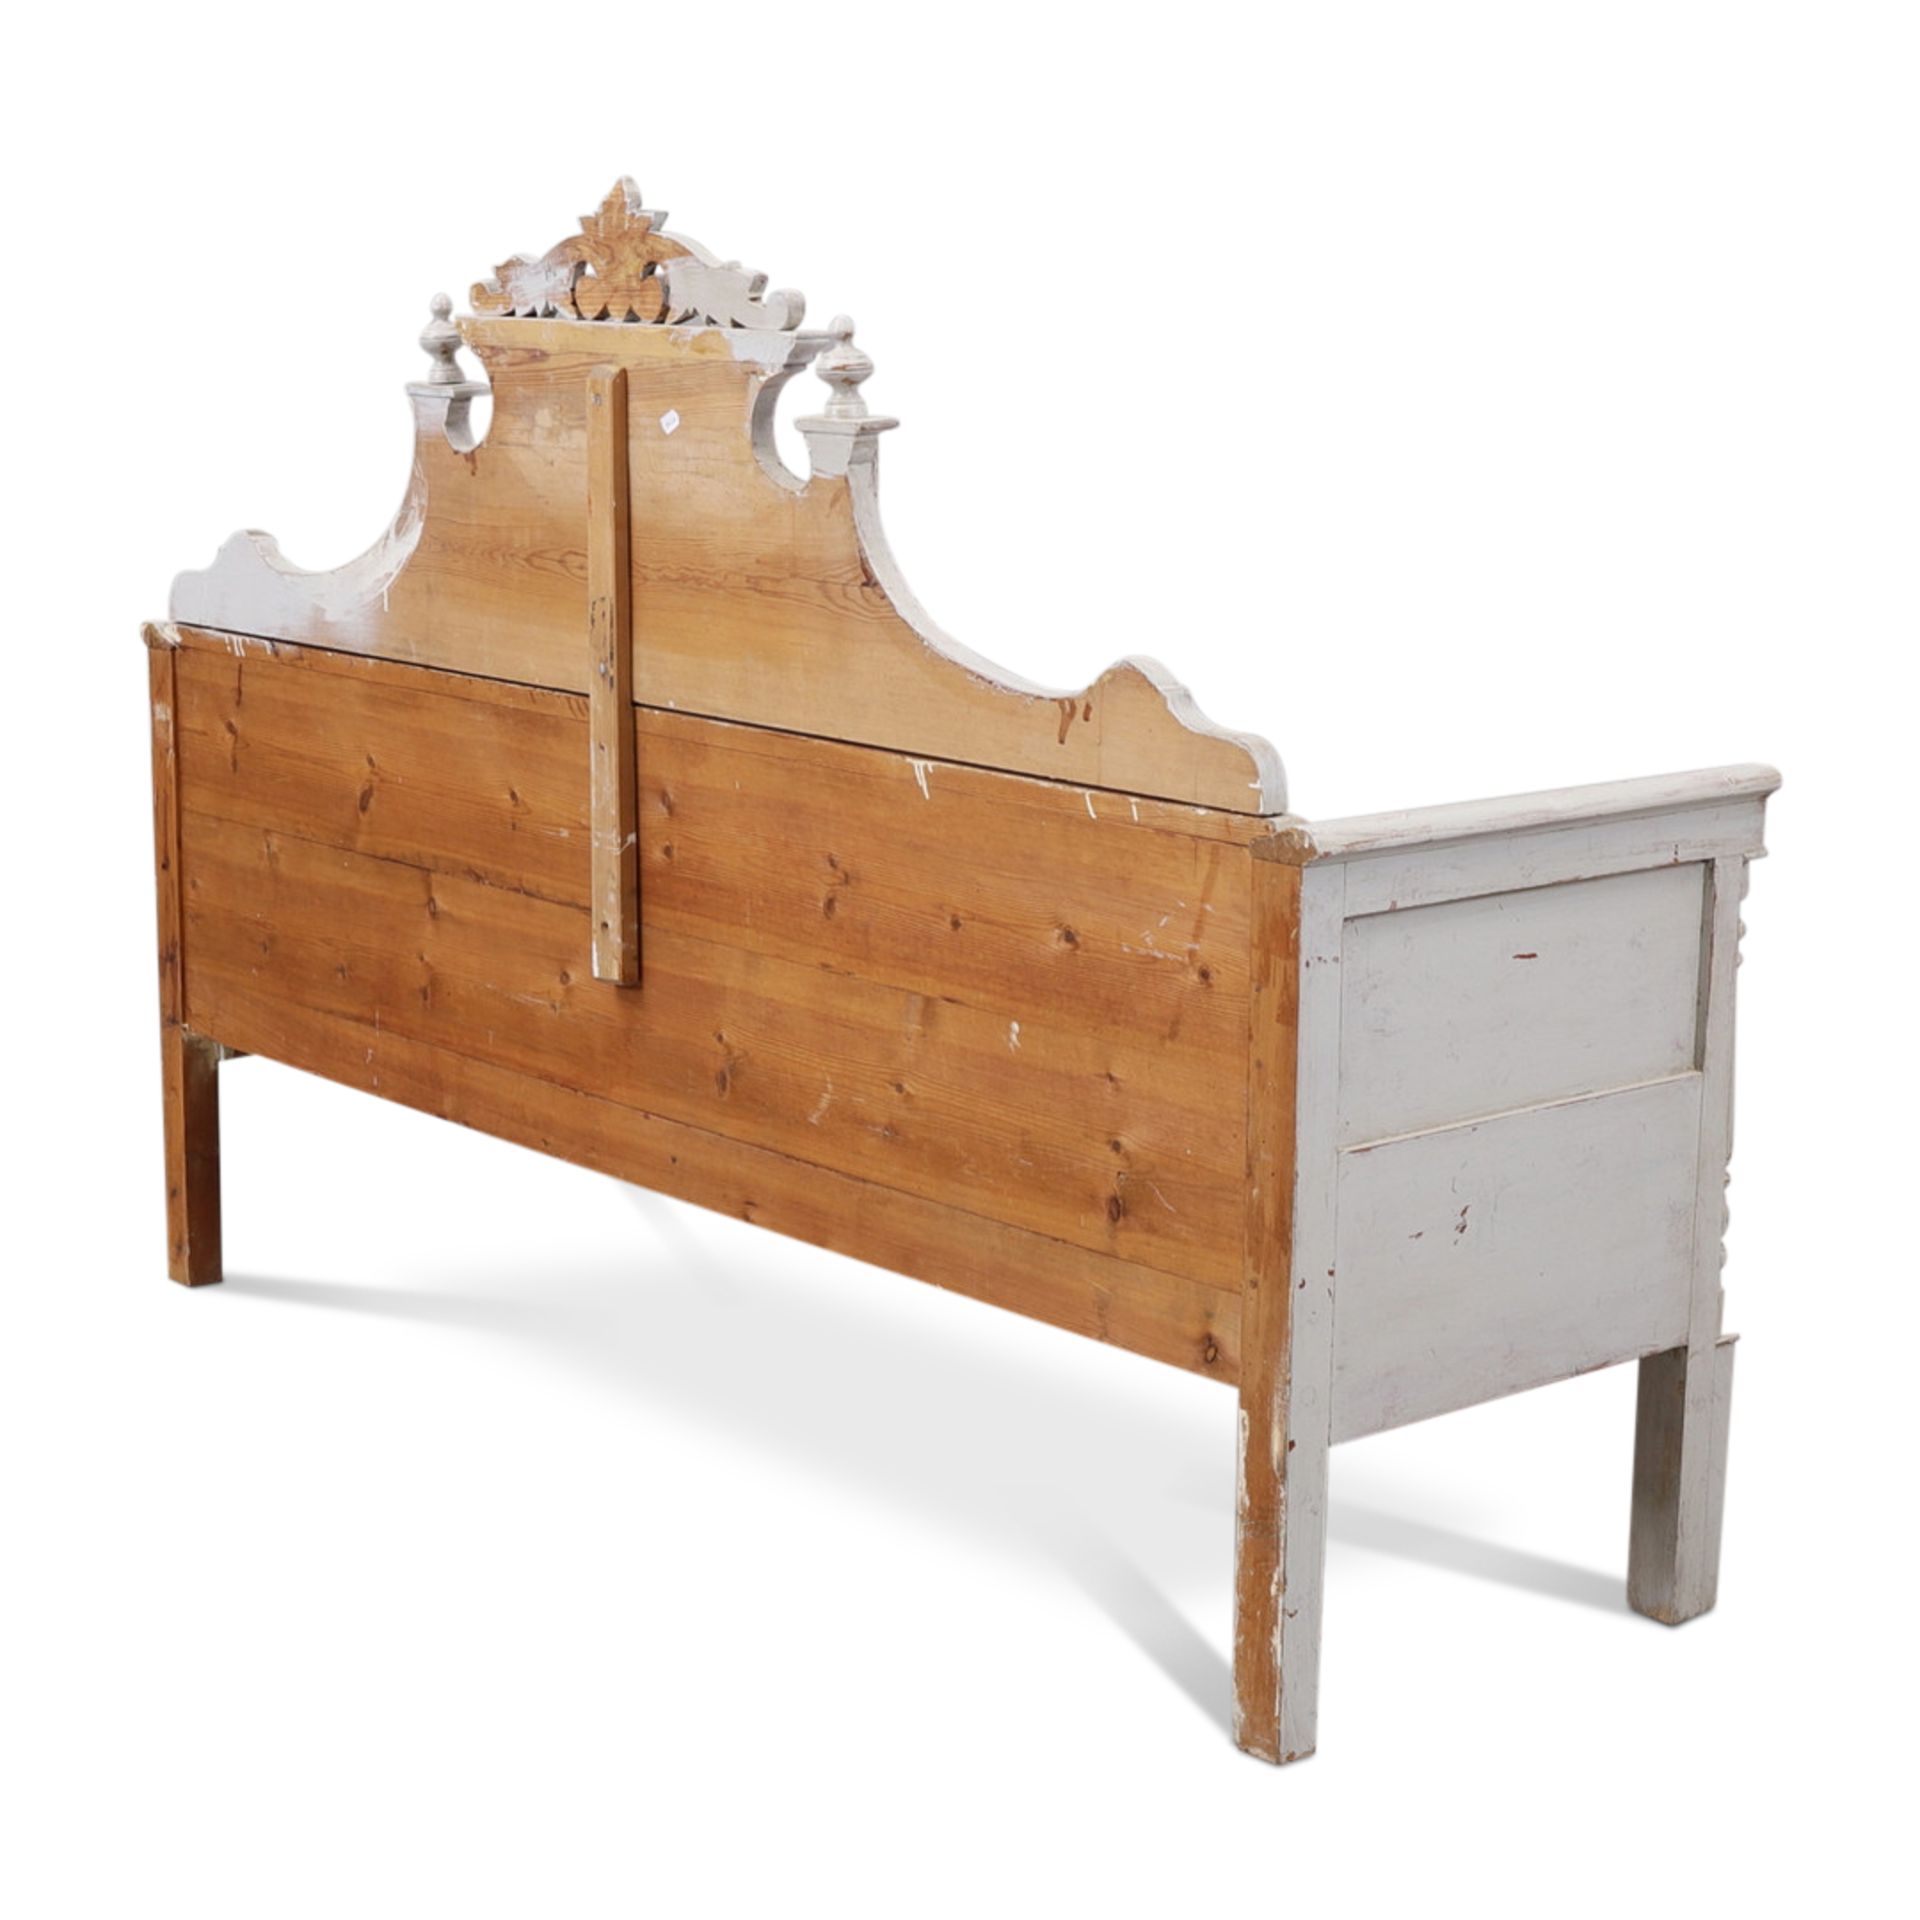 A 19TH CENTURY SWEDISH GUSTAVIAN PAINTED WOOD SETTLE - Image 4 of 4